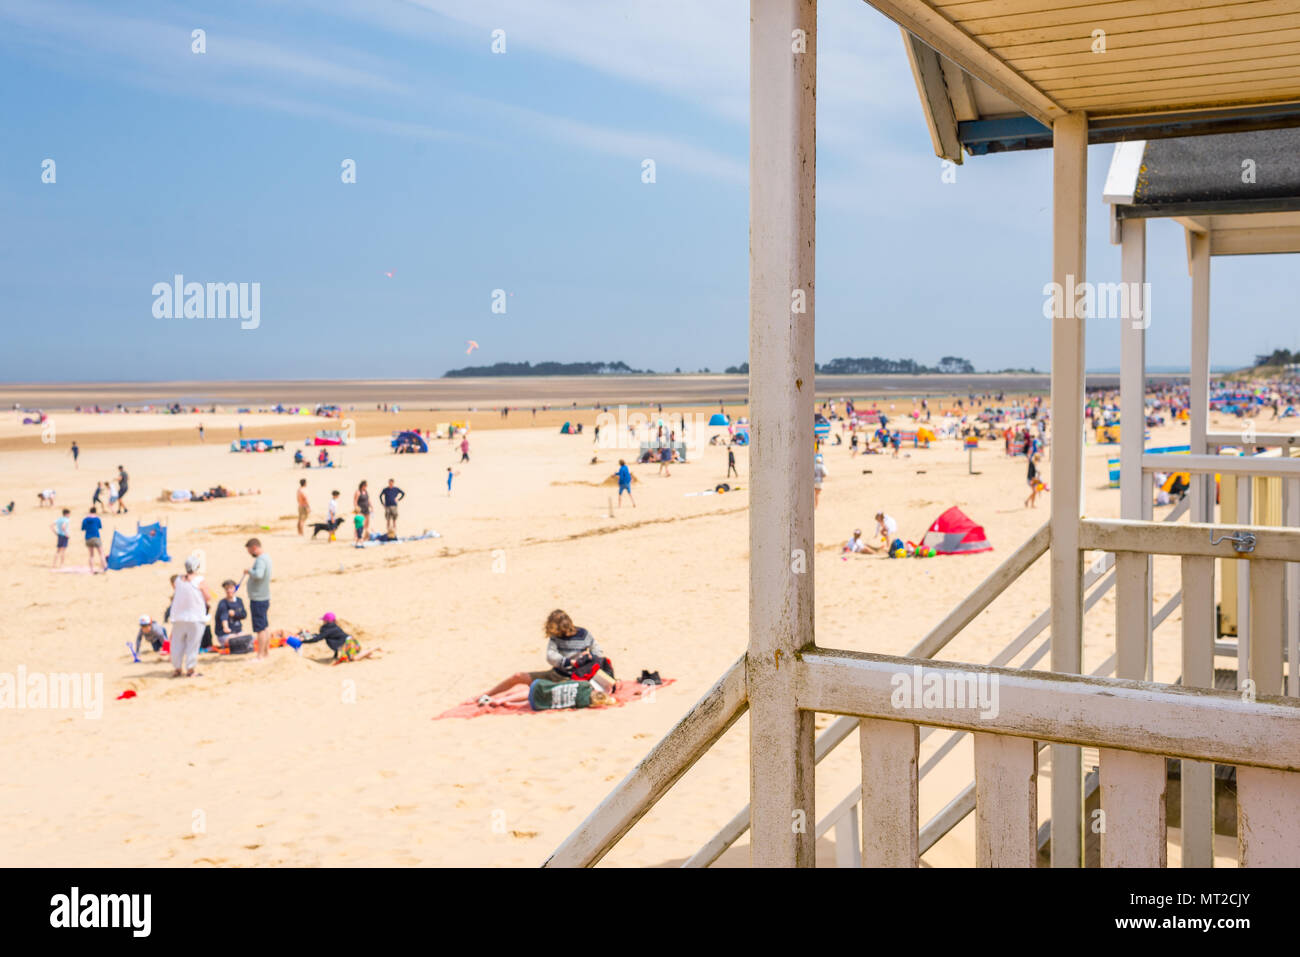 Wells-next-the-Sea, Norfolk, UK. 27th May 2018. People enjoying the sunny warm day during the Bank Holiday weekend  on the beach in Norfolk. Credit: Nicola Ferrari/Alamy Live News. Stock Photo